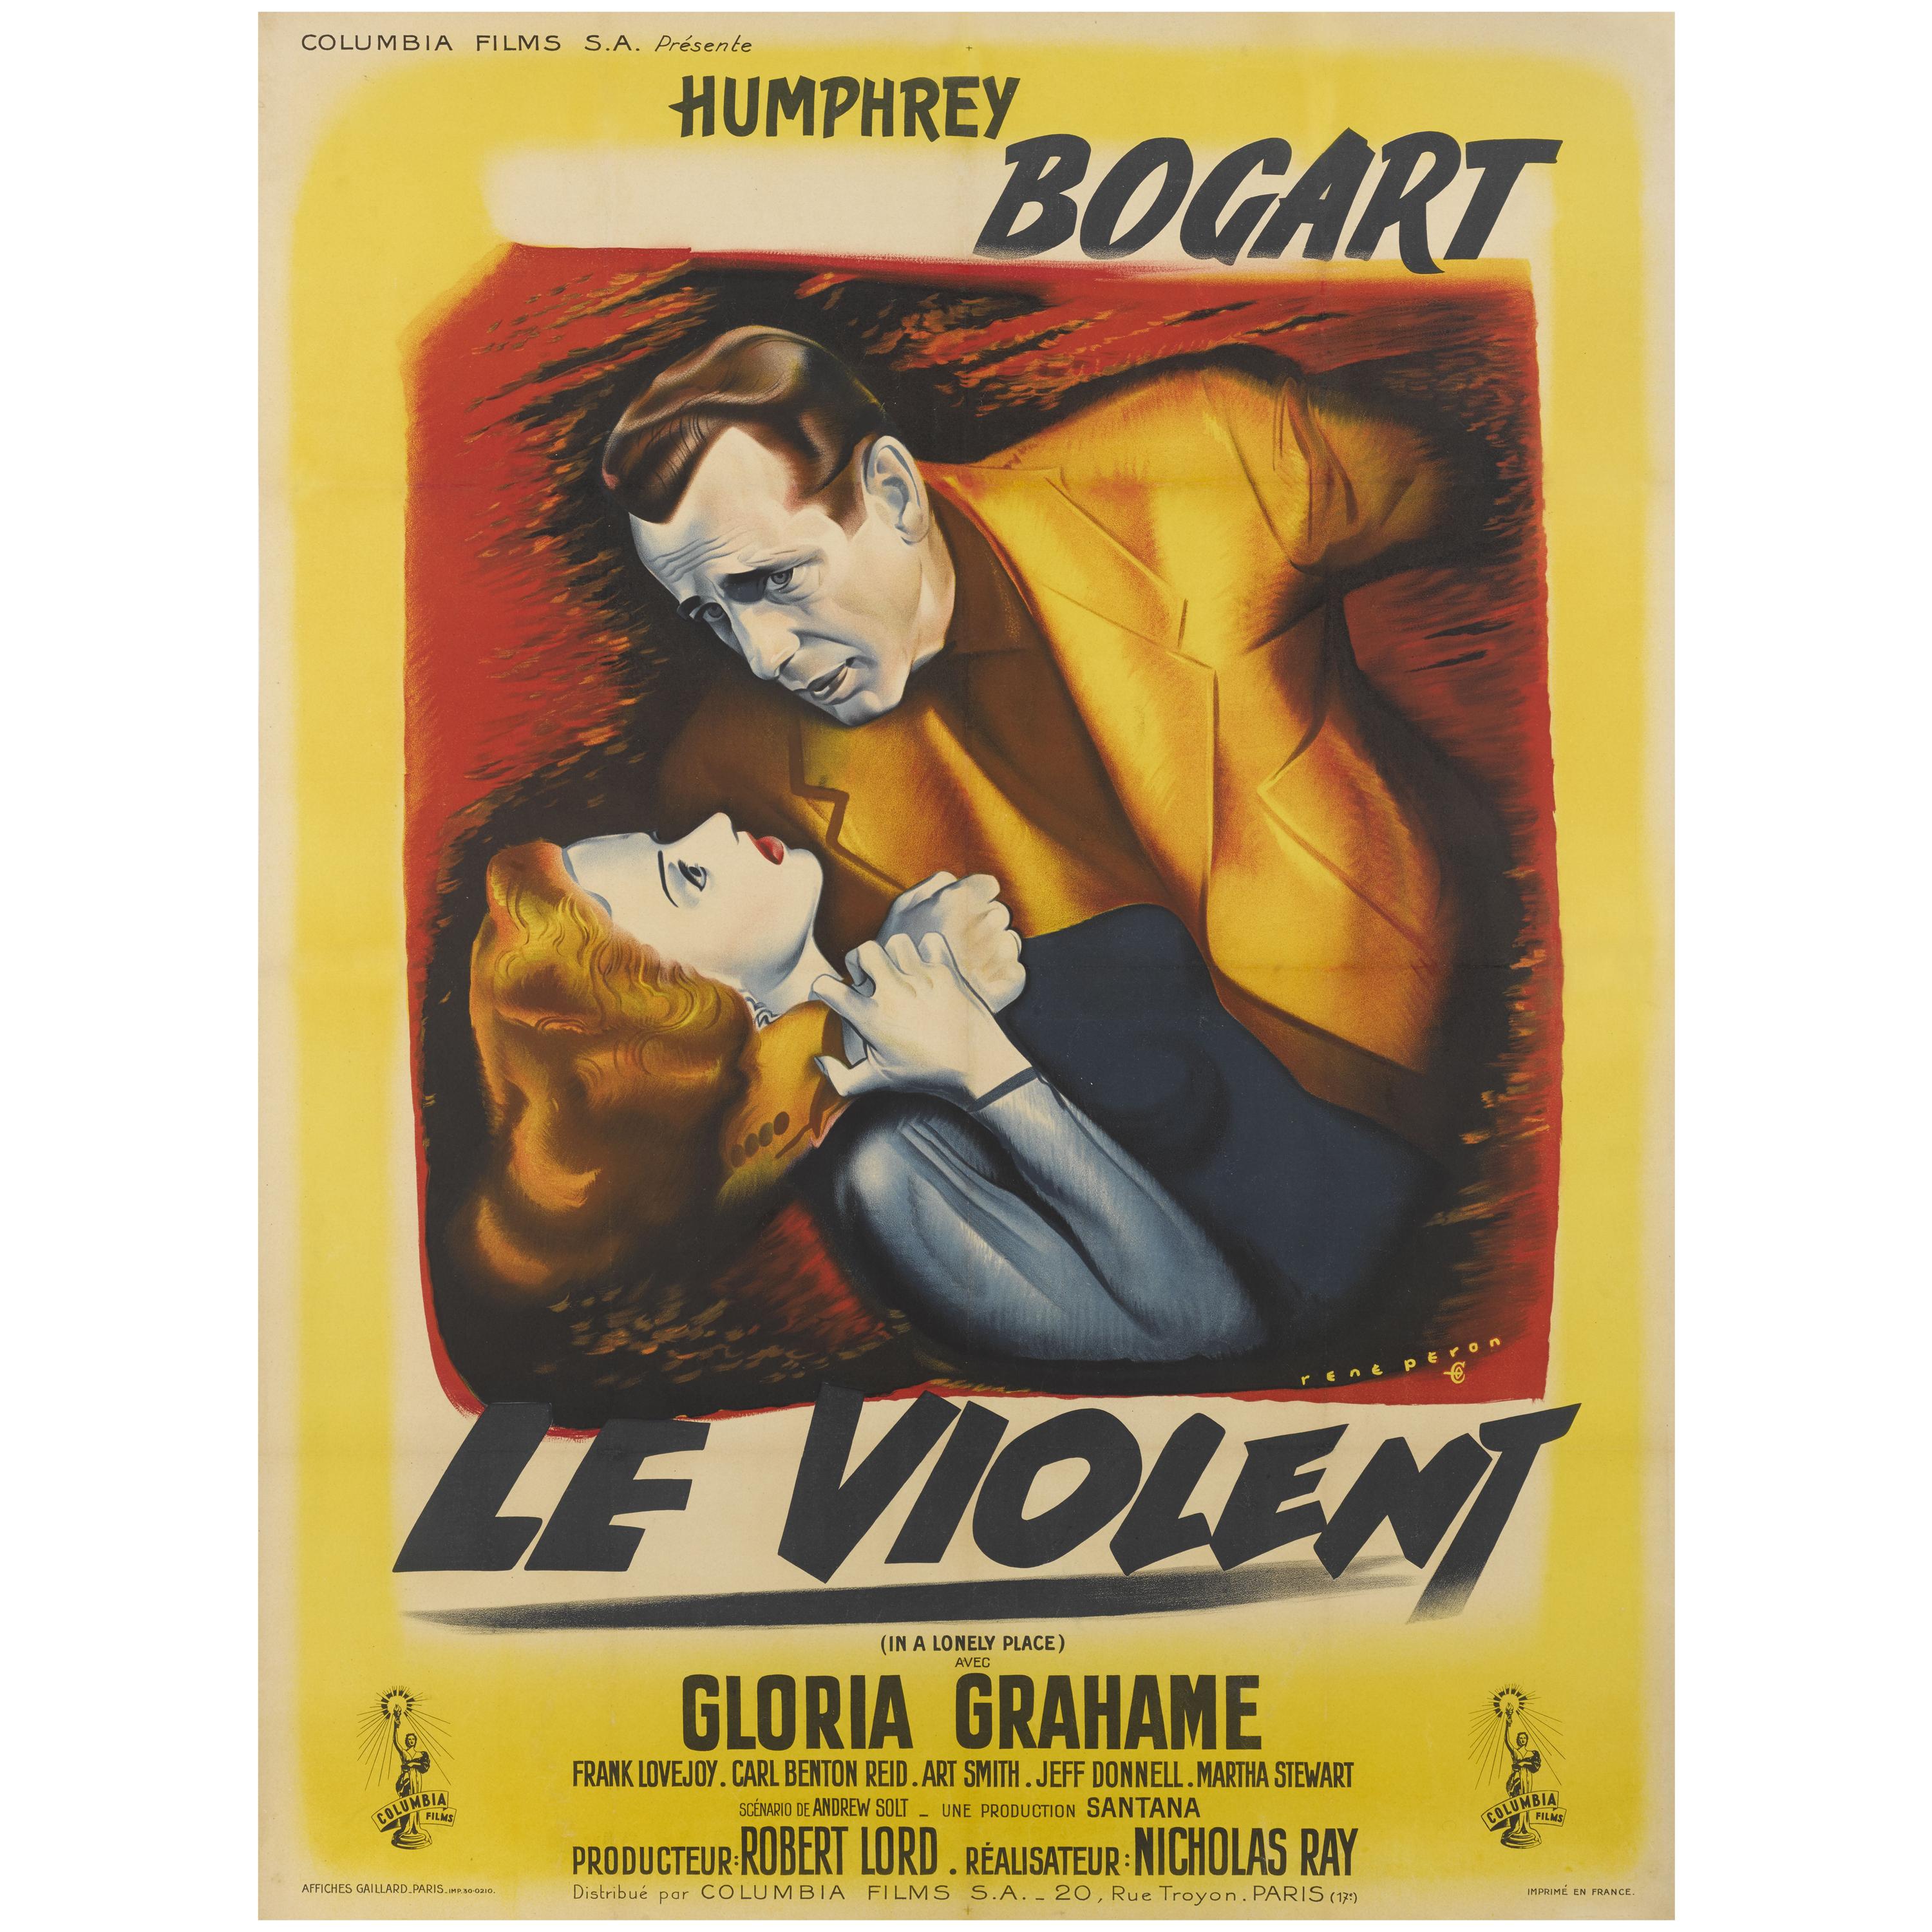 In a Lonely Place / Le Violent